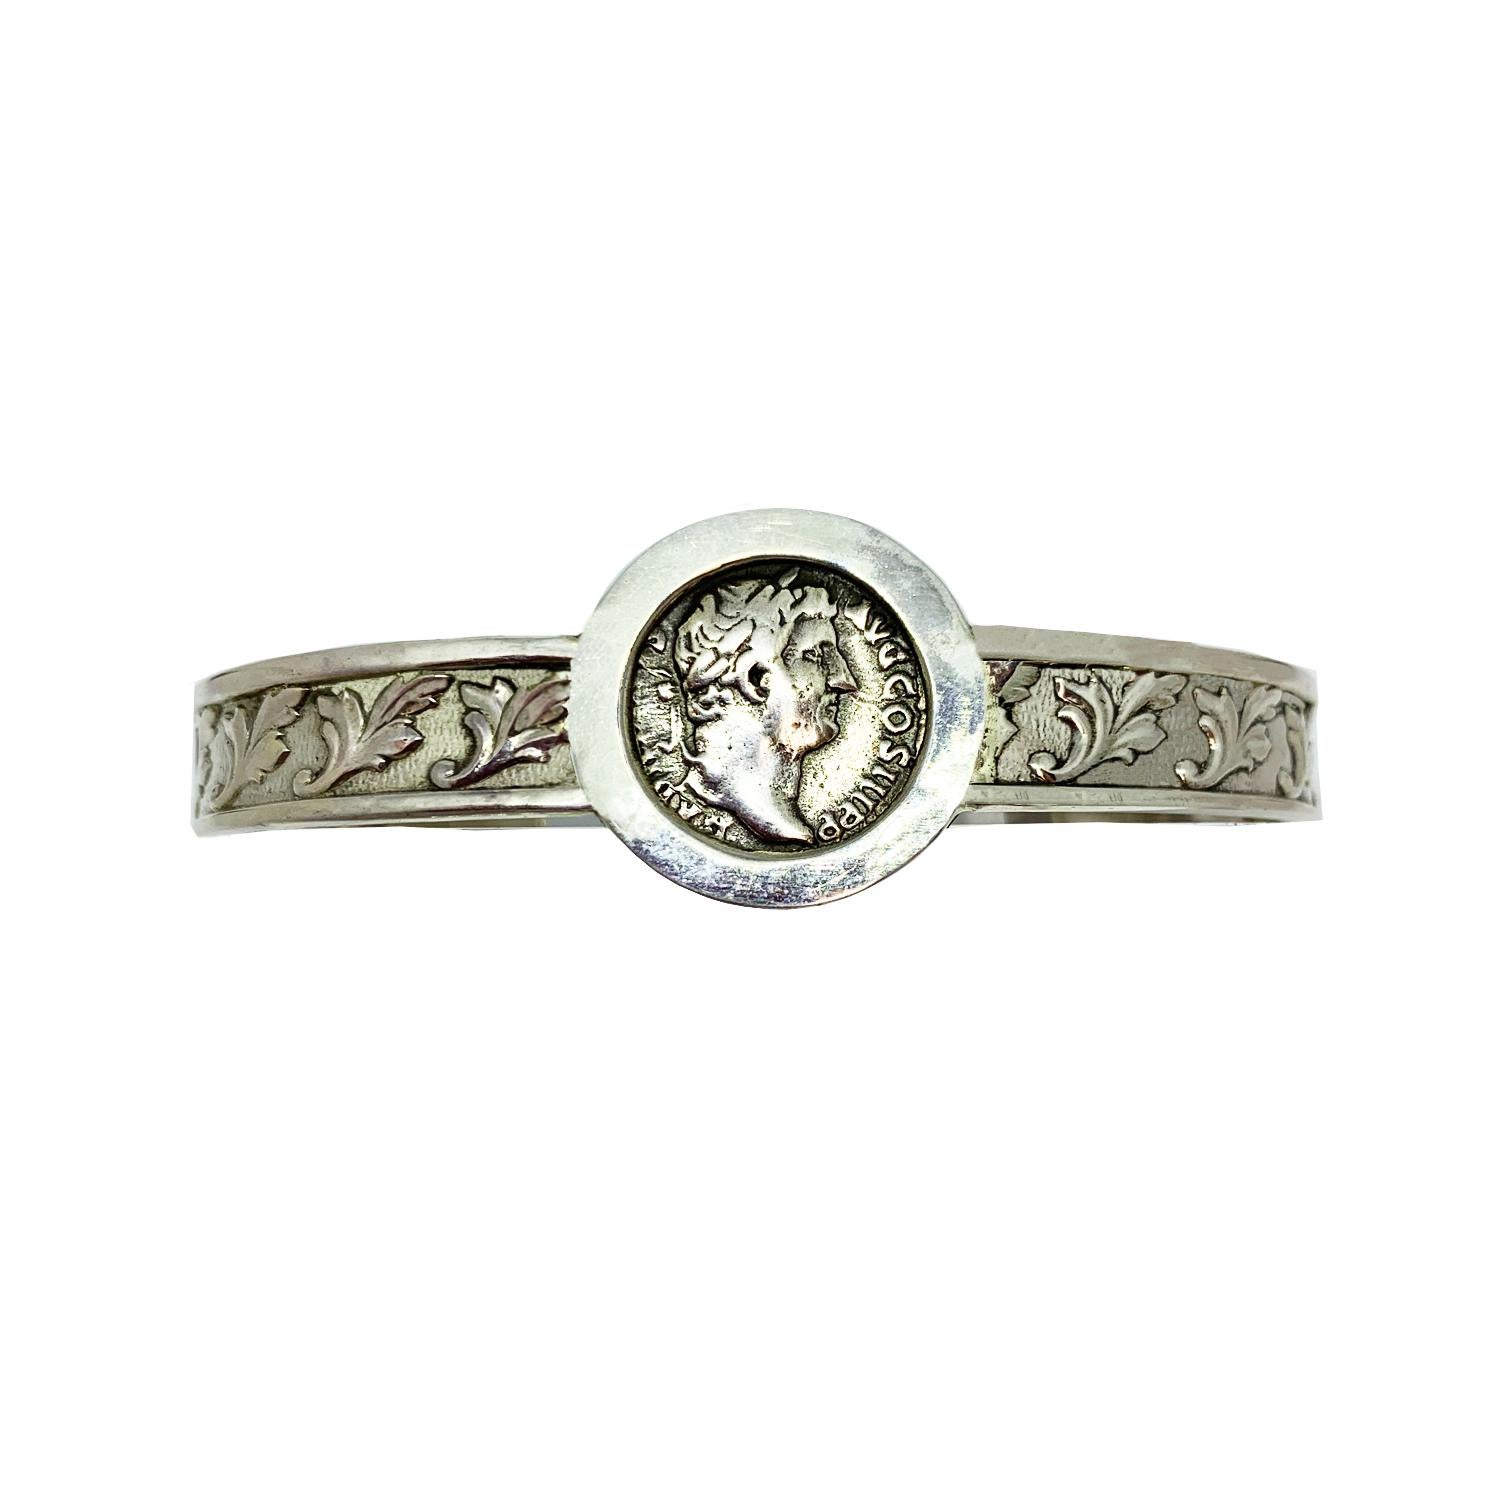 A Roman coin is set in this bracelet : an authentic Roman denarius of the 2nd century A.D. (silver denarius) which depicts the emperor Hadrian; in the reverse side of the coin, which we left open to be visible, the Goddess Rome is depicted sitting